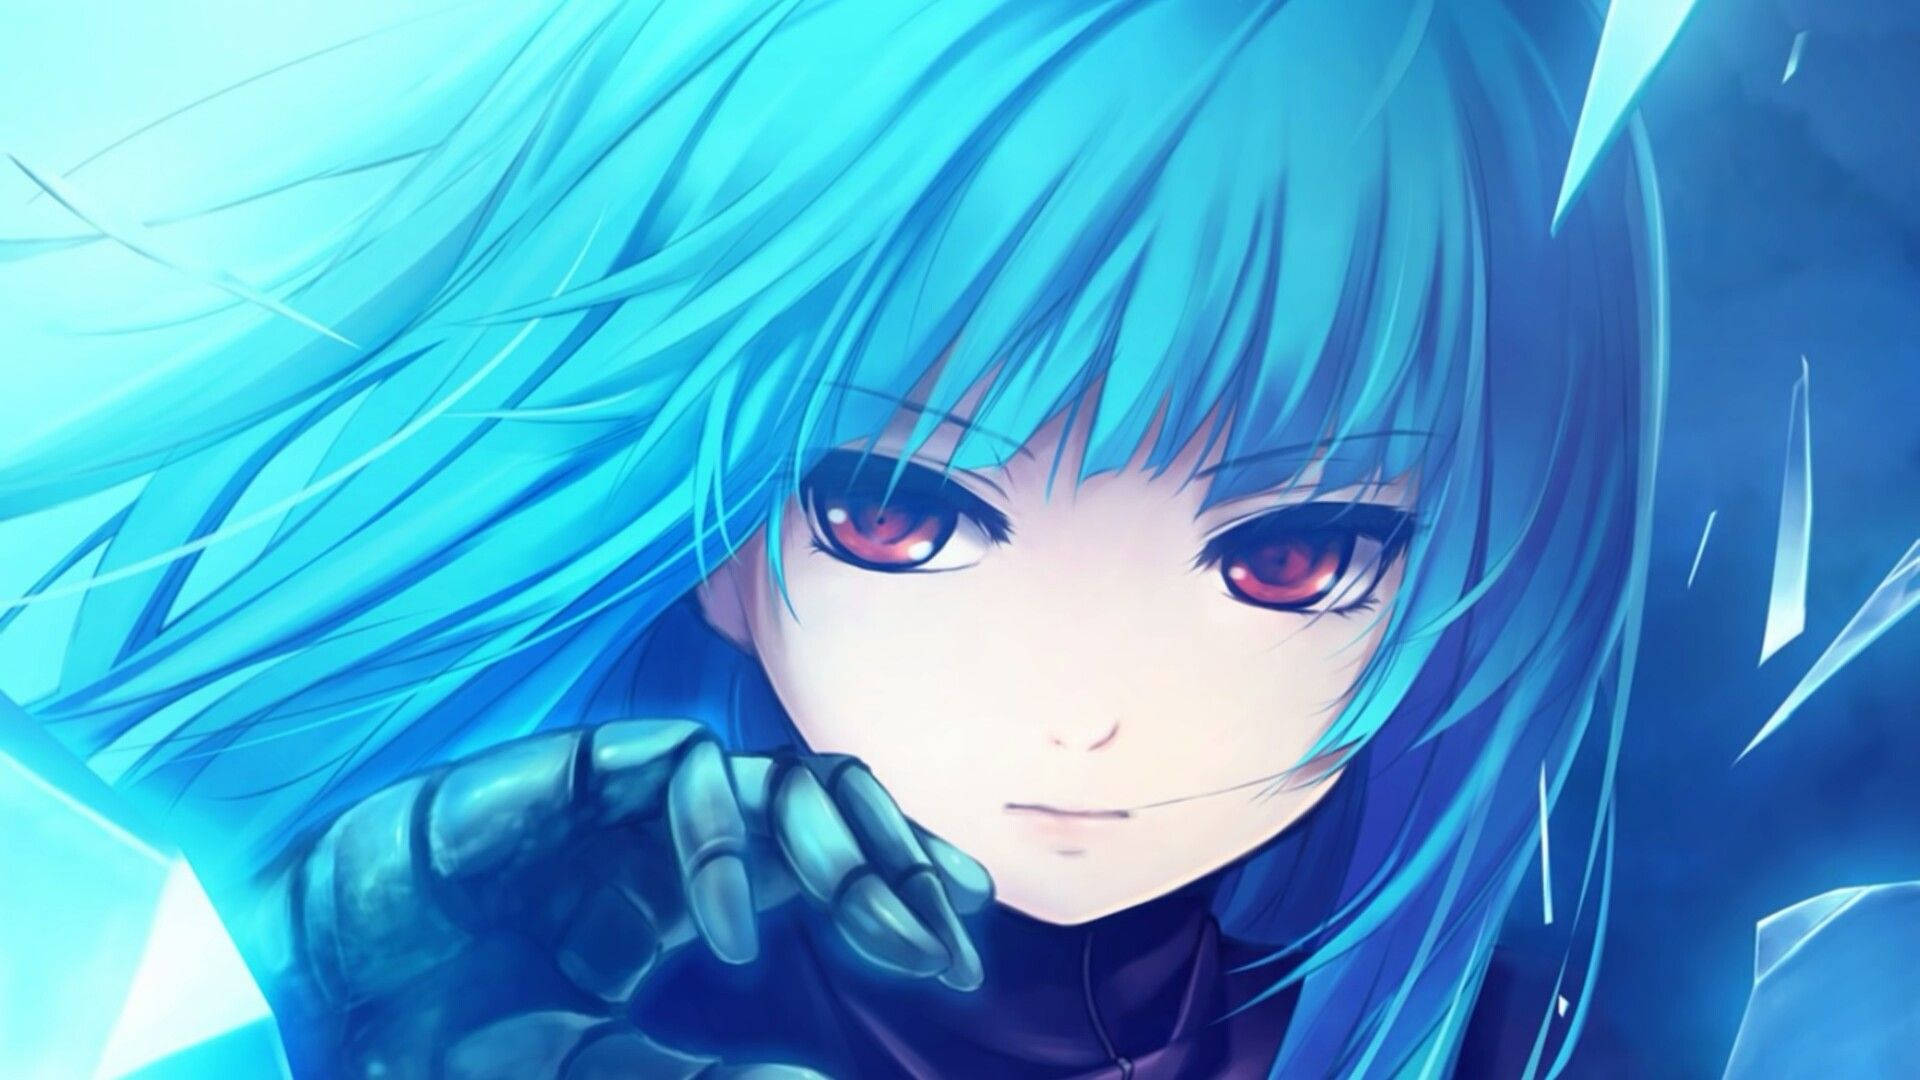 Blue haired anime girl with red fierce eyes and a metal hand wallpaper